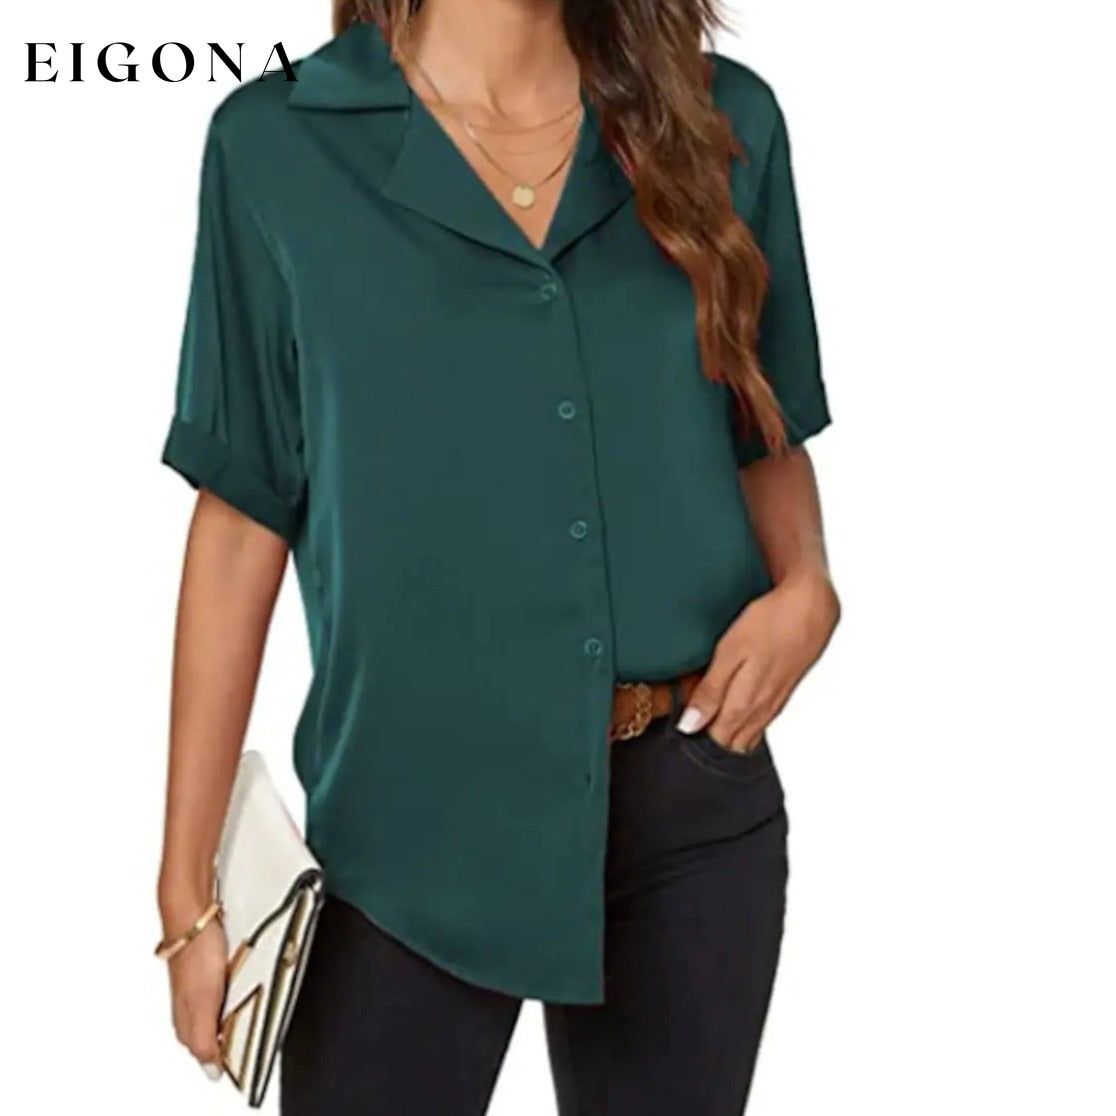 Women's Short Sleeve Casual Satin Button Down Shirt Dark Green __stock:200 clothes Low stock refund_fee:800 tops